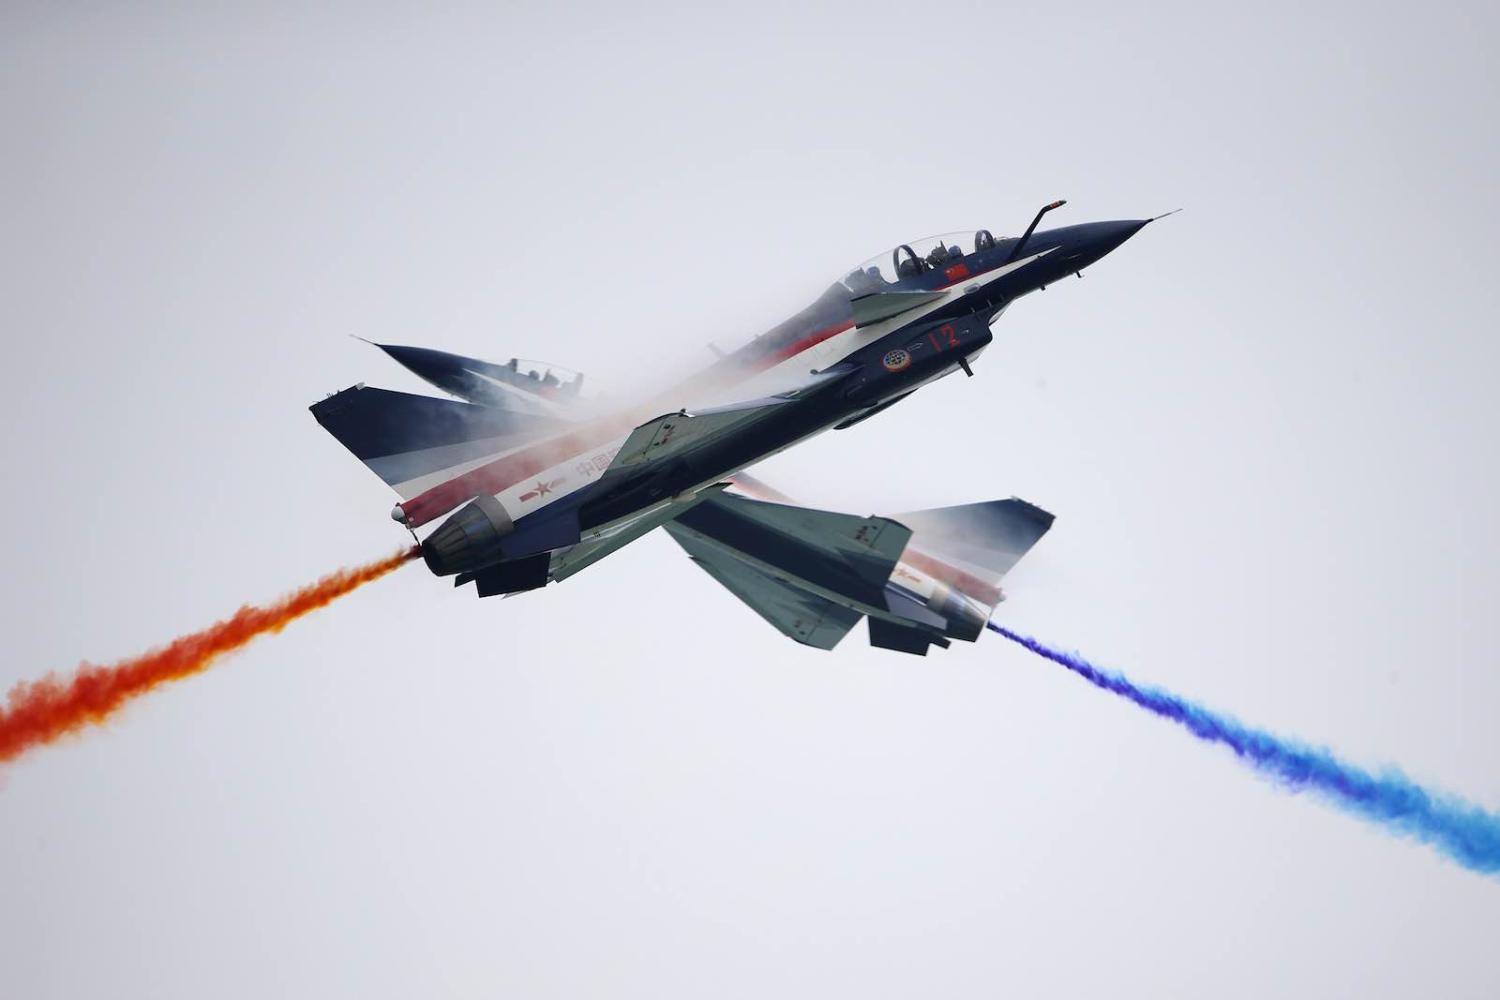 J-10 fighter jets of China's People’s Liberation Army Air Force Ba Yi aerobatics team perform during the Singapore Airshow in February (Suhaimi Abdullah/Getty Images)